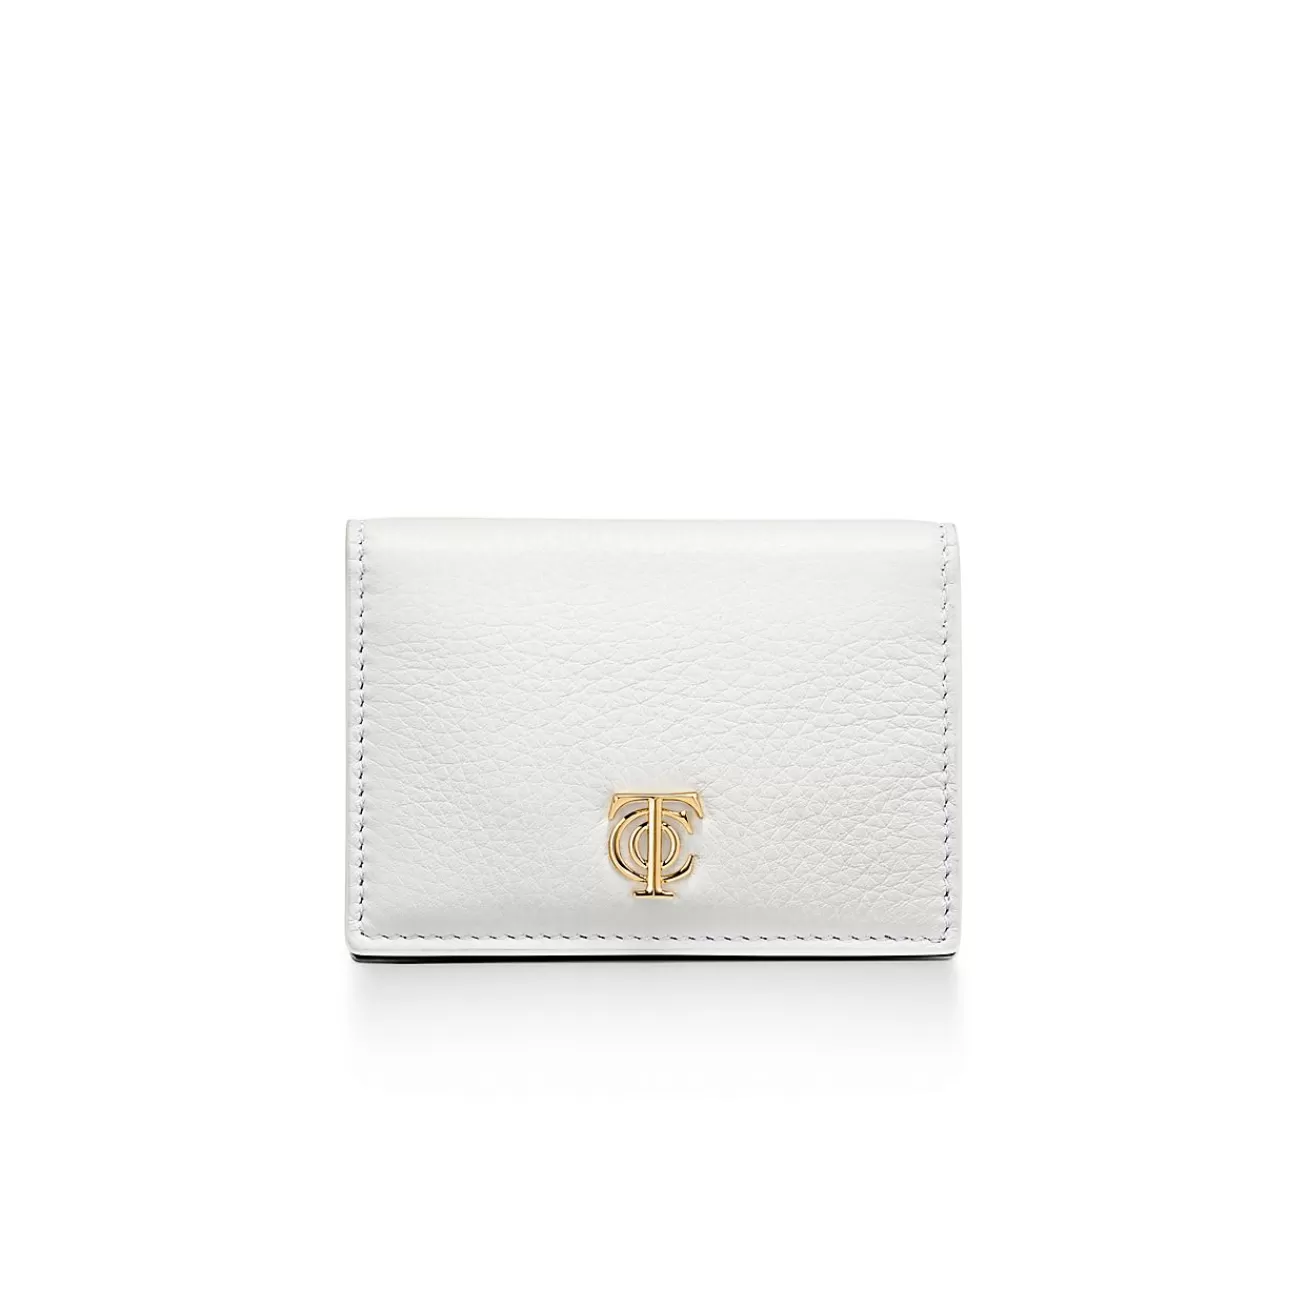 Tiffany & Co. T&CO. Flap Card Holder in White Leather | ^Women Small Leather Goods | Women's Accessories